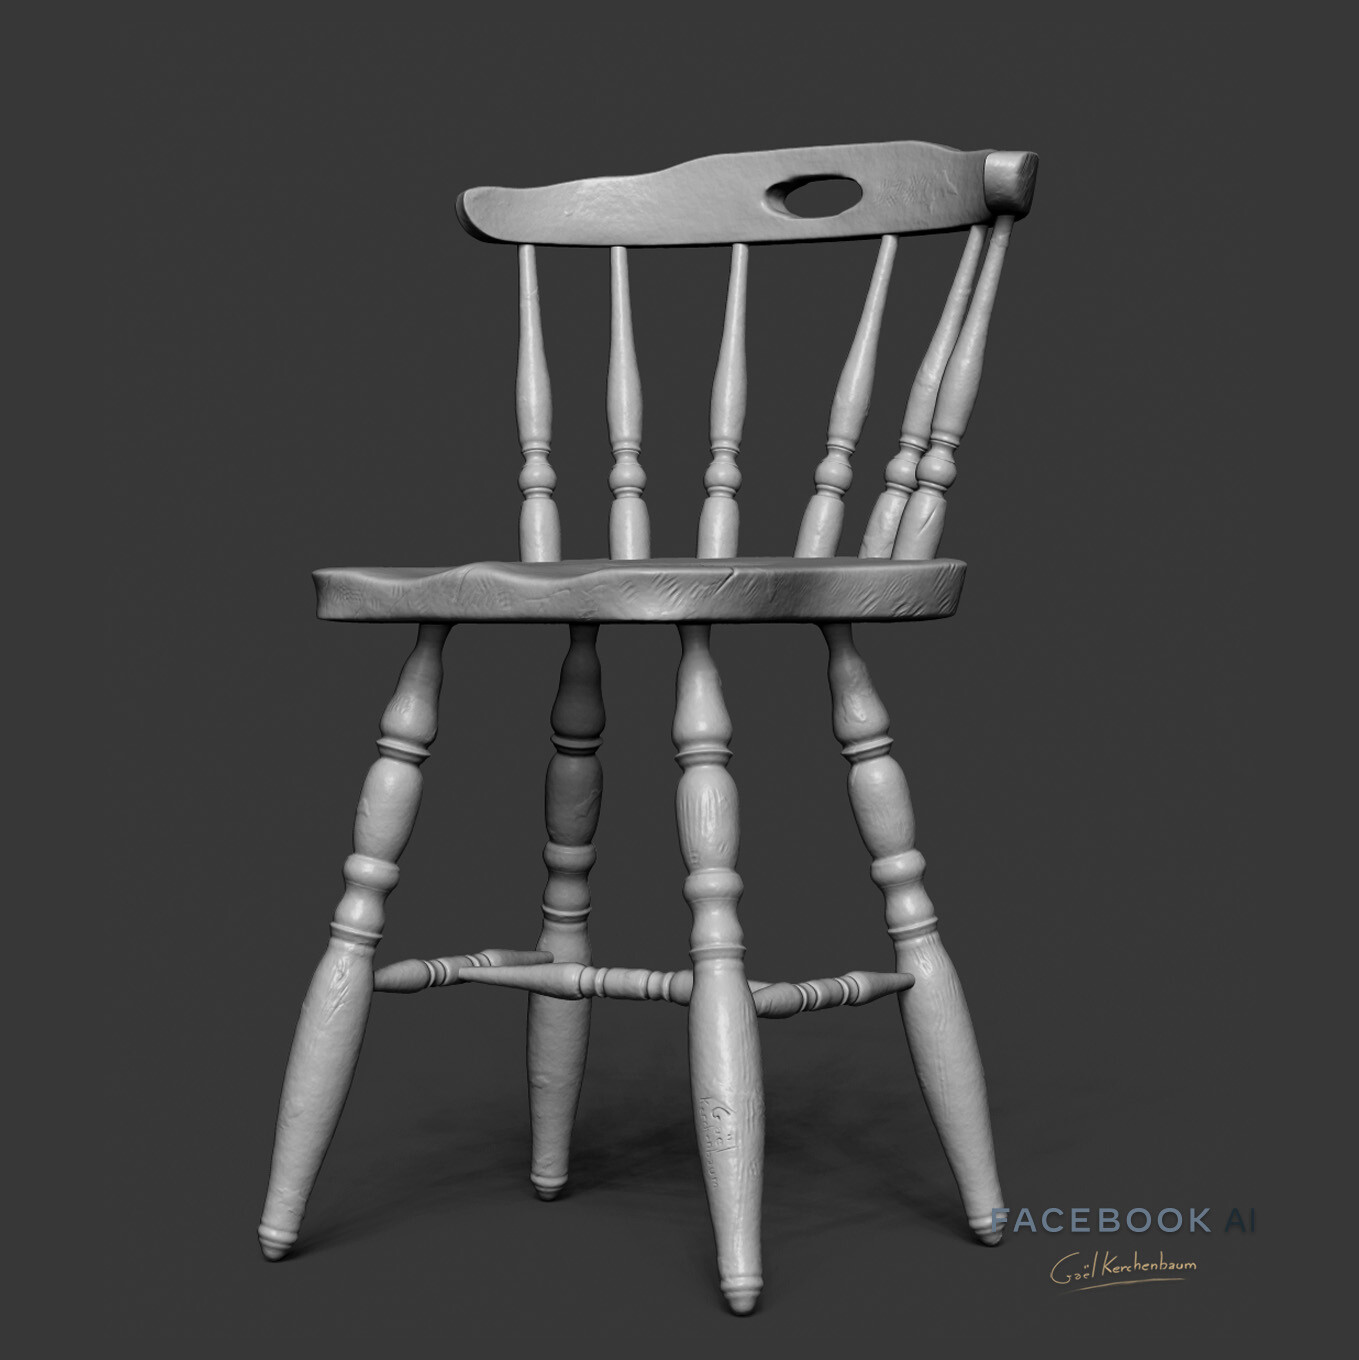 Chair asset, done in ZBrush